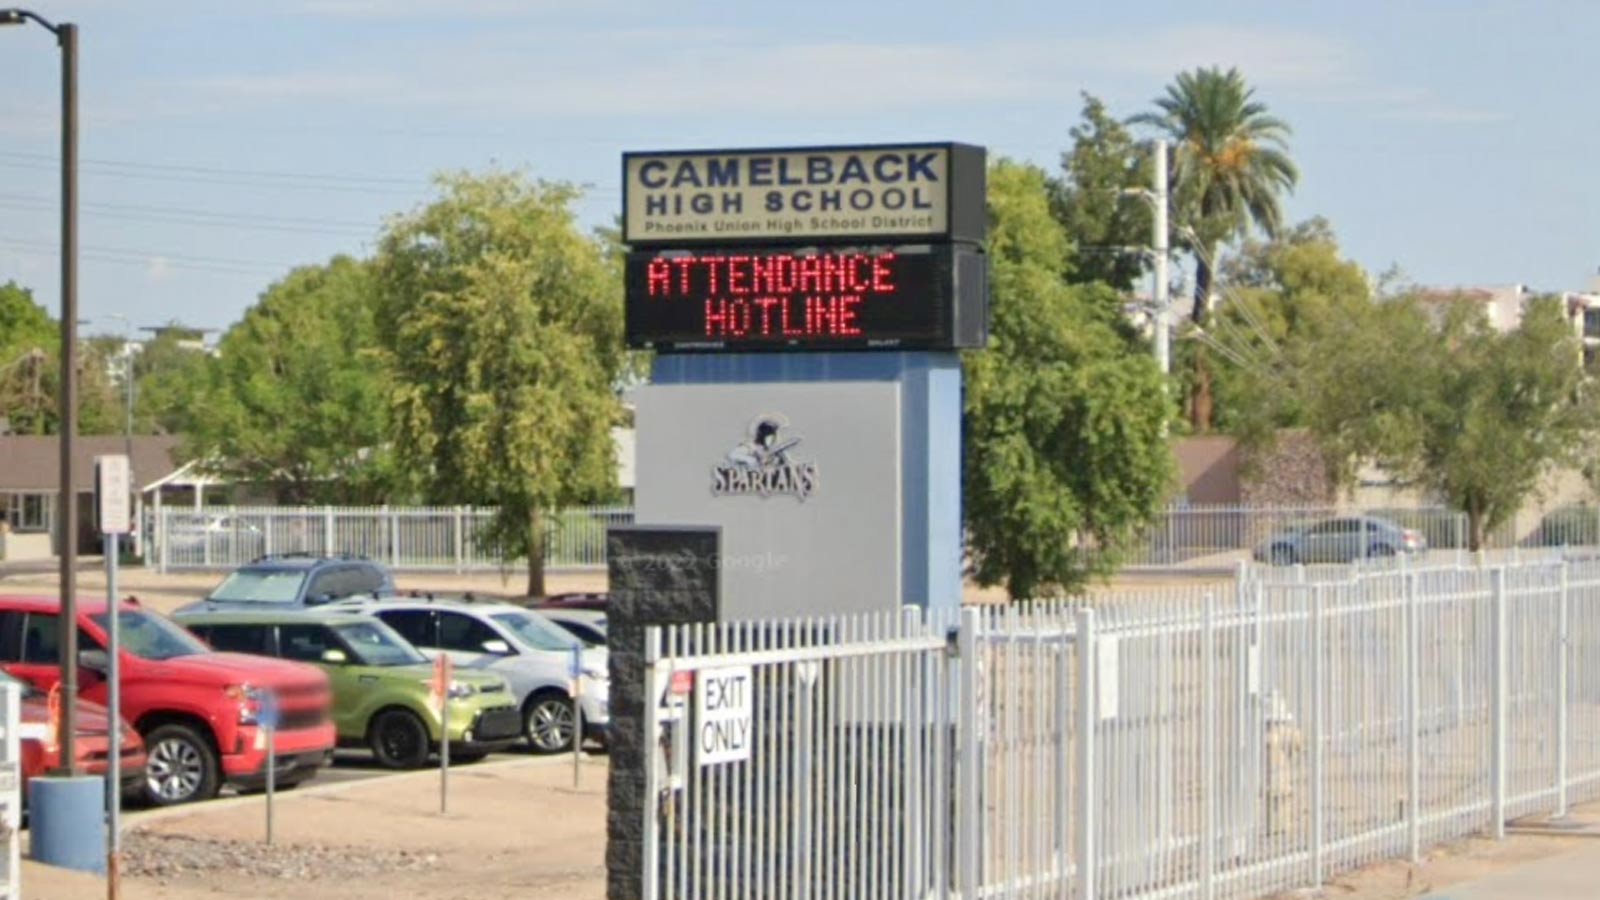 Google Street View image of the sign for Camelback High School in Phoenix, which was temporarily lo...